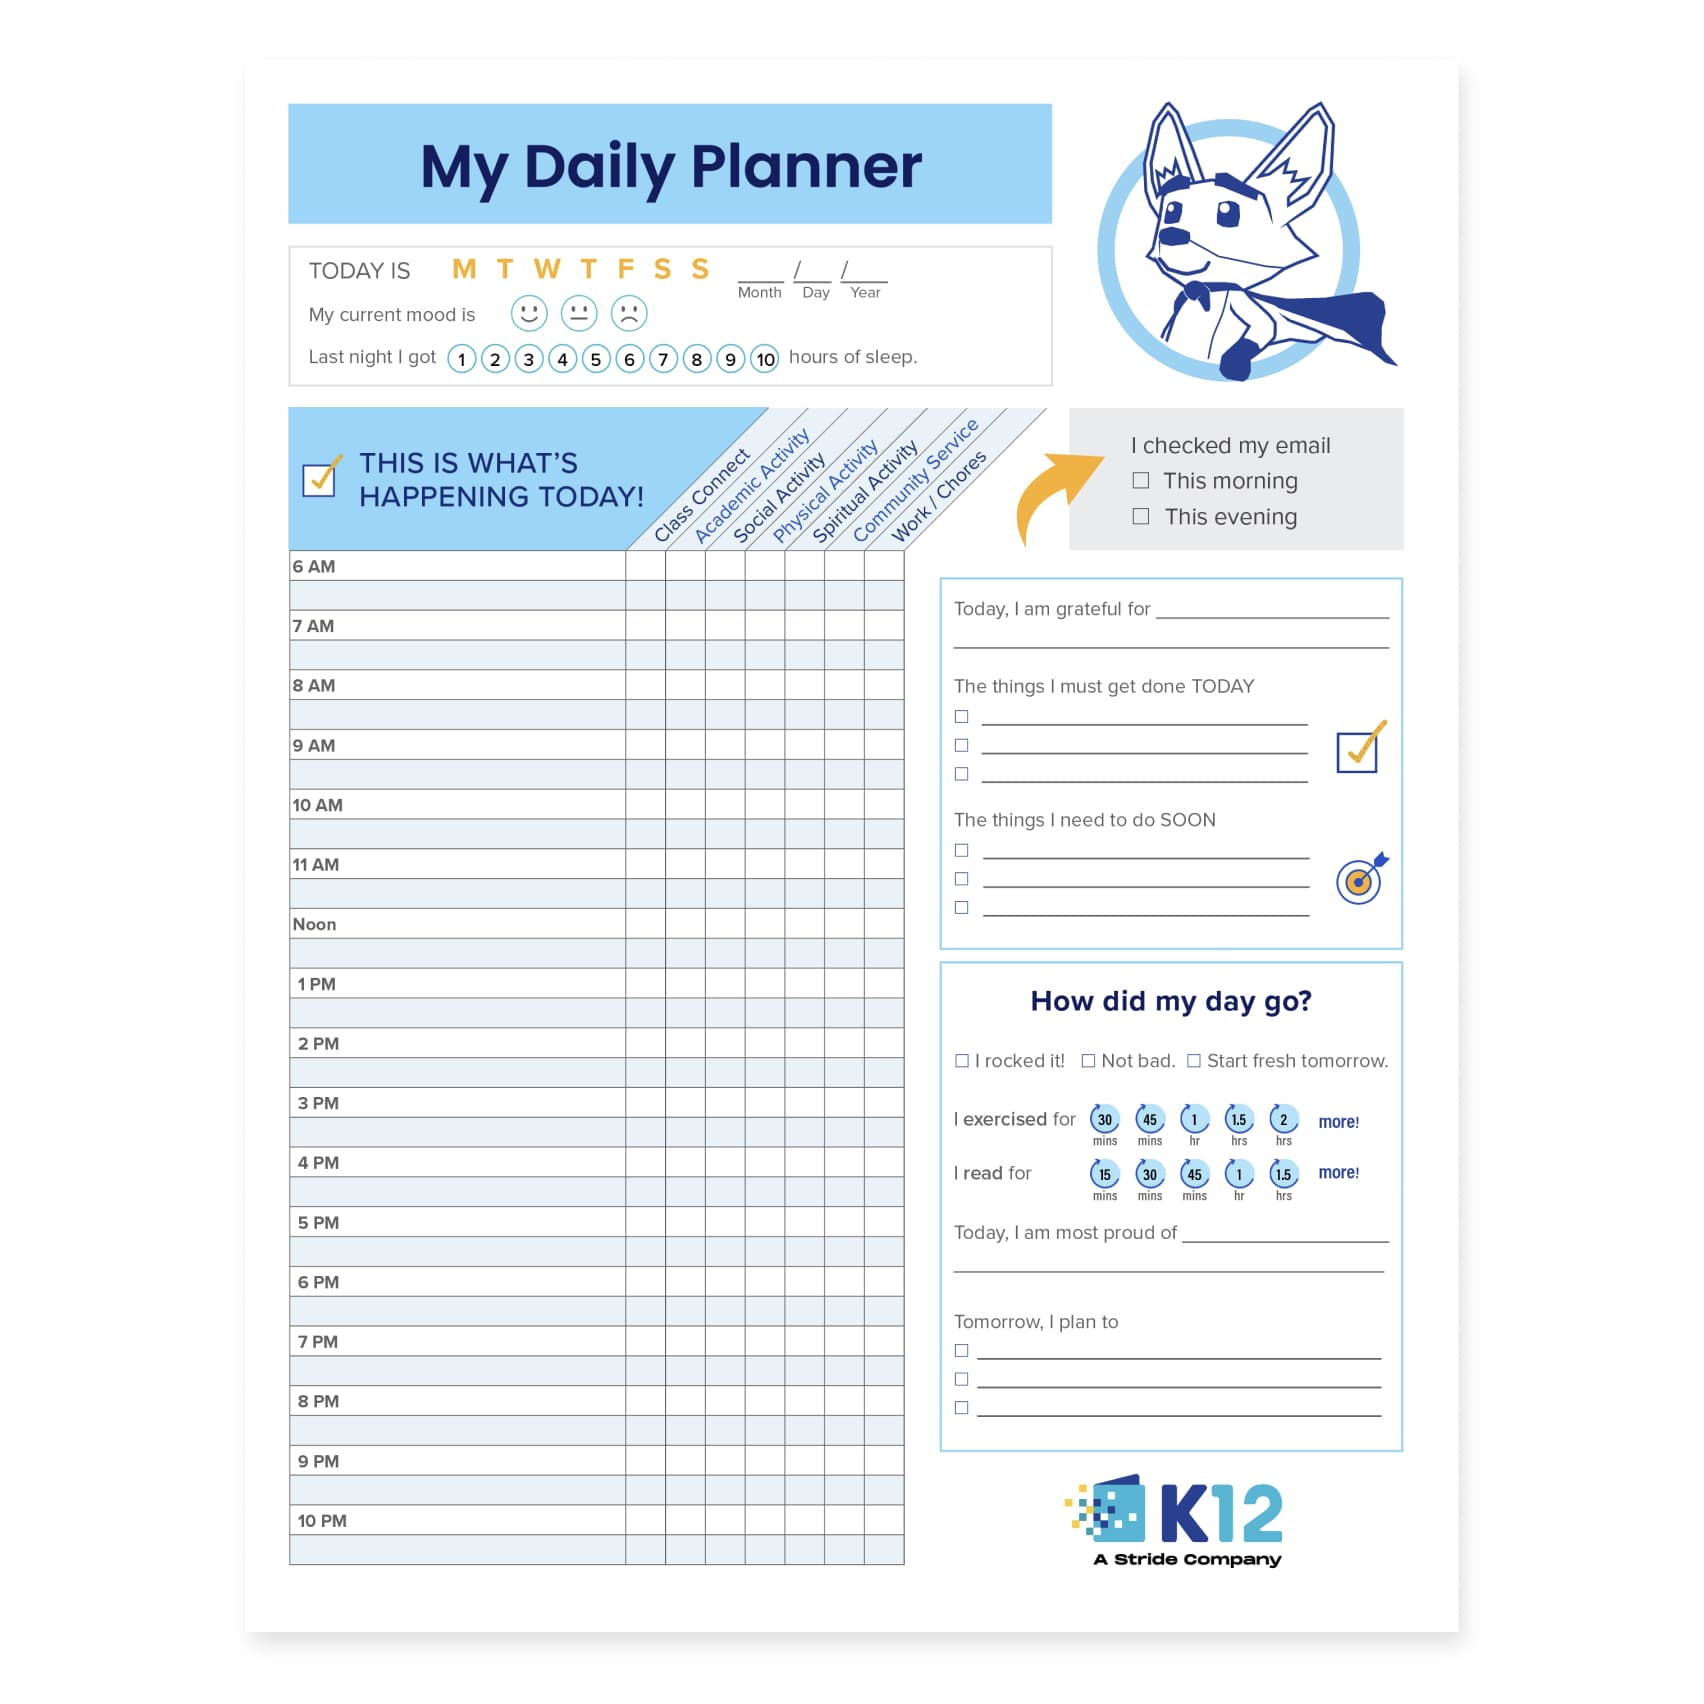 Students Corner image 8 (name Daily Planner 1 568x568 1)